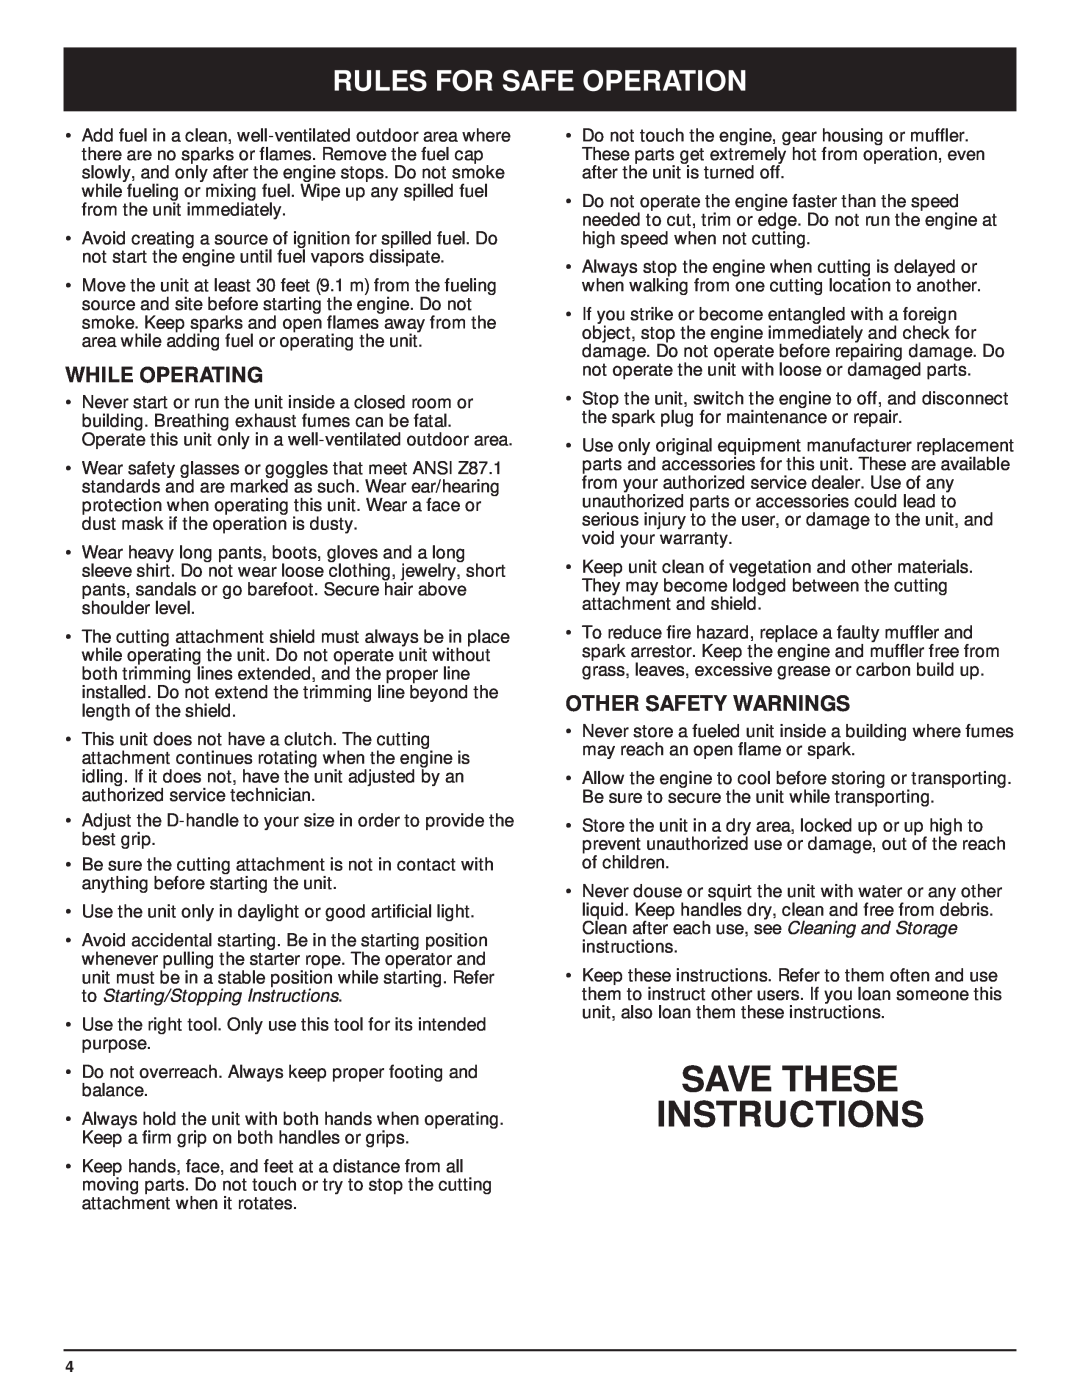 MTD Y28 manual Save These Instructions, While Operating, Other Safety Warnings, Rules For Safe Operation 